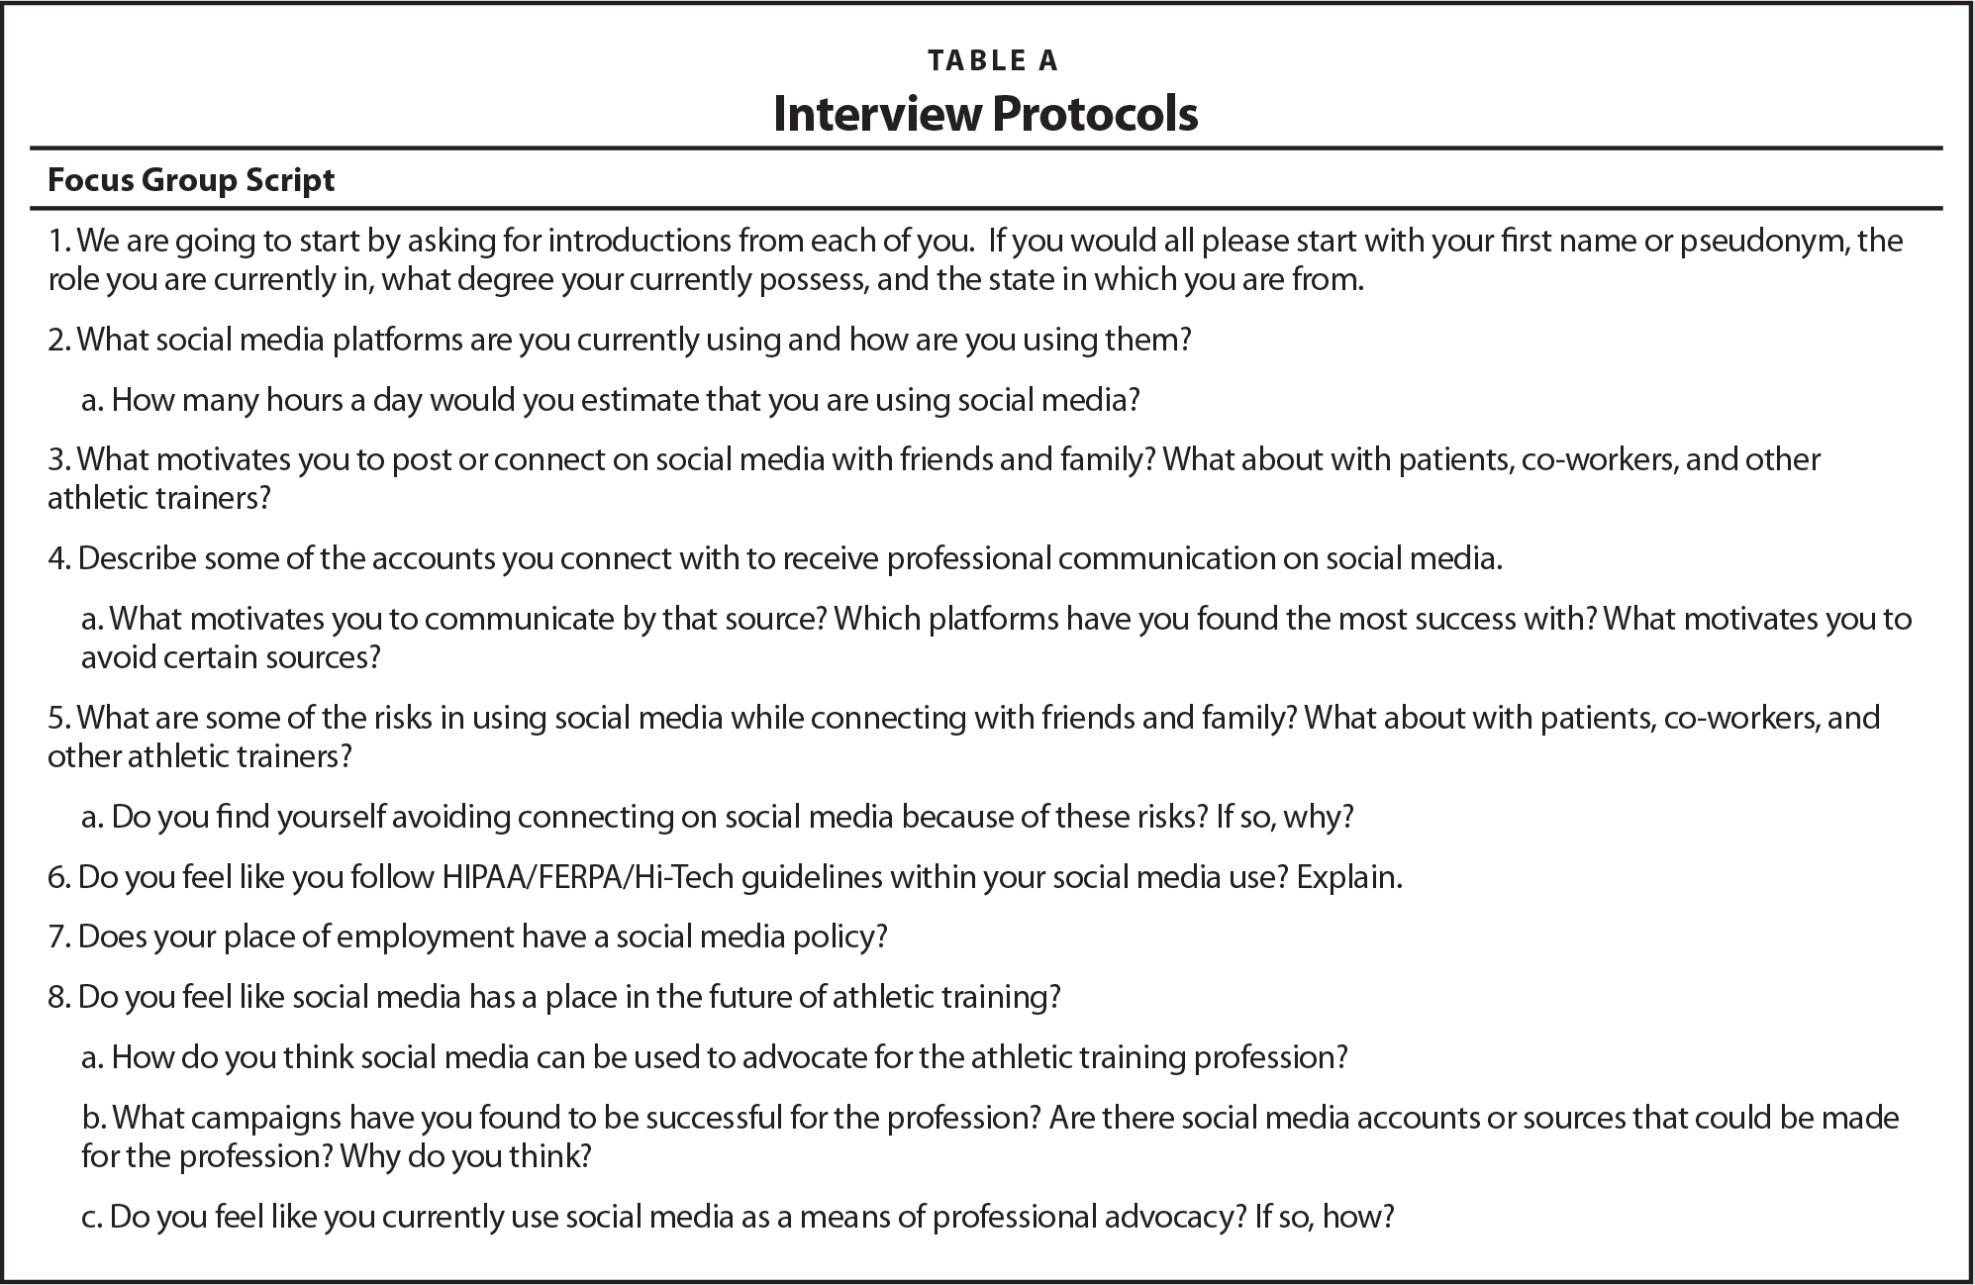 Athletic Trainers' Social Media Use: A Focus Group Study In Pilot Test Agreement Template